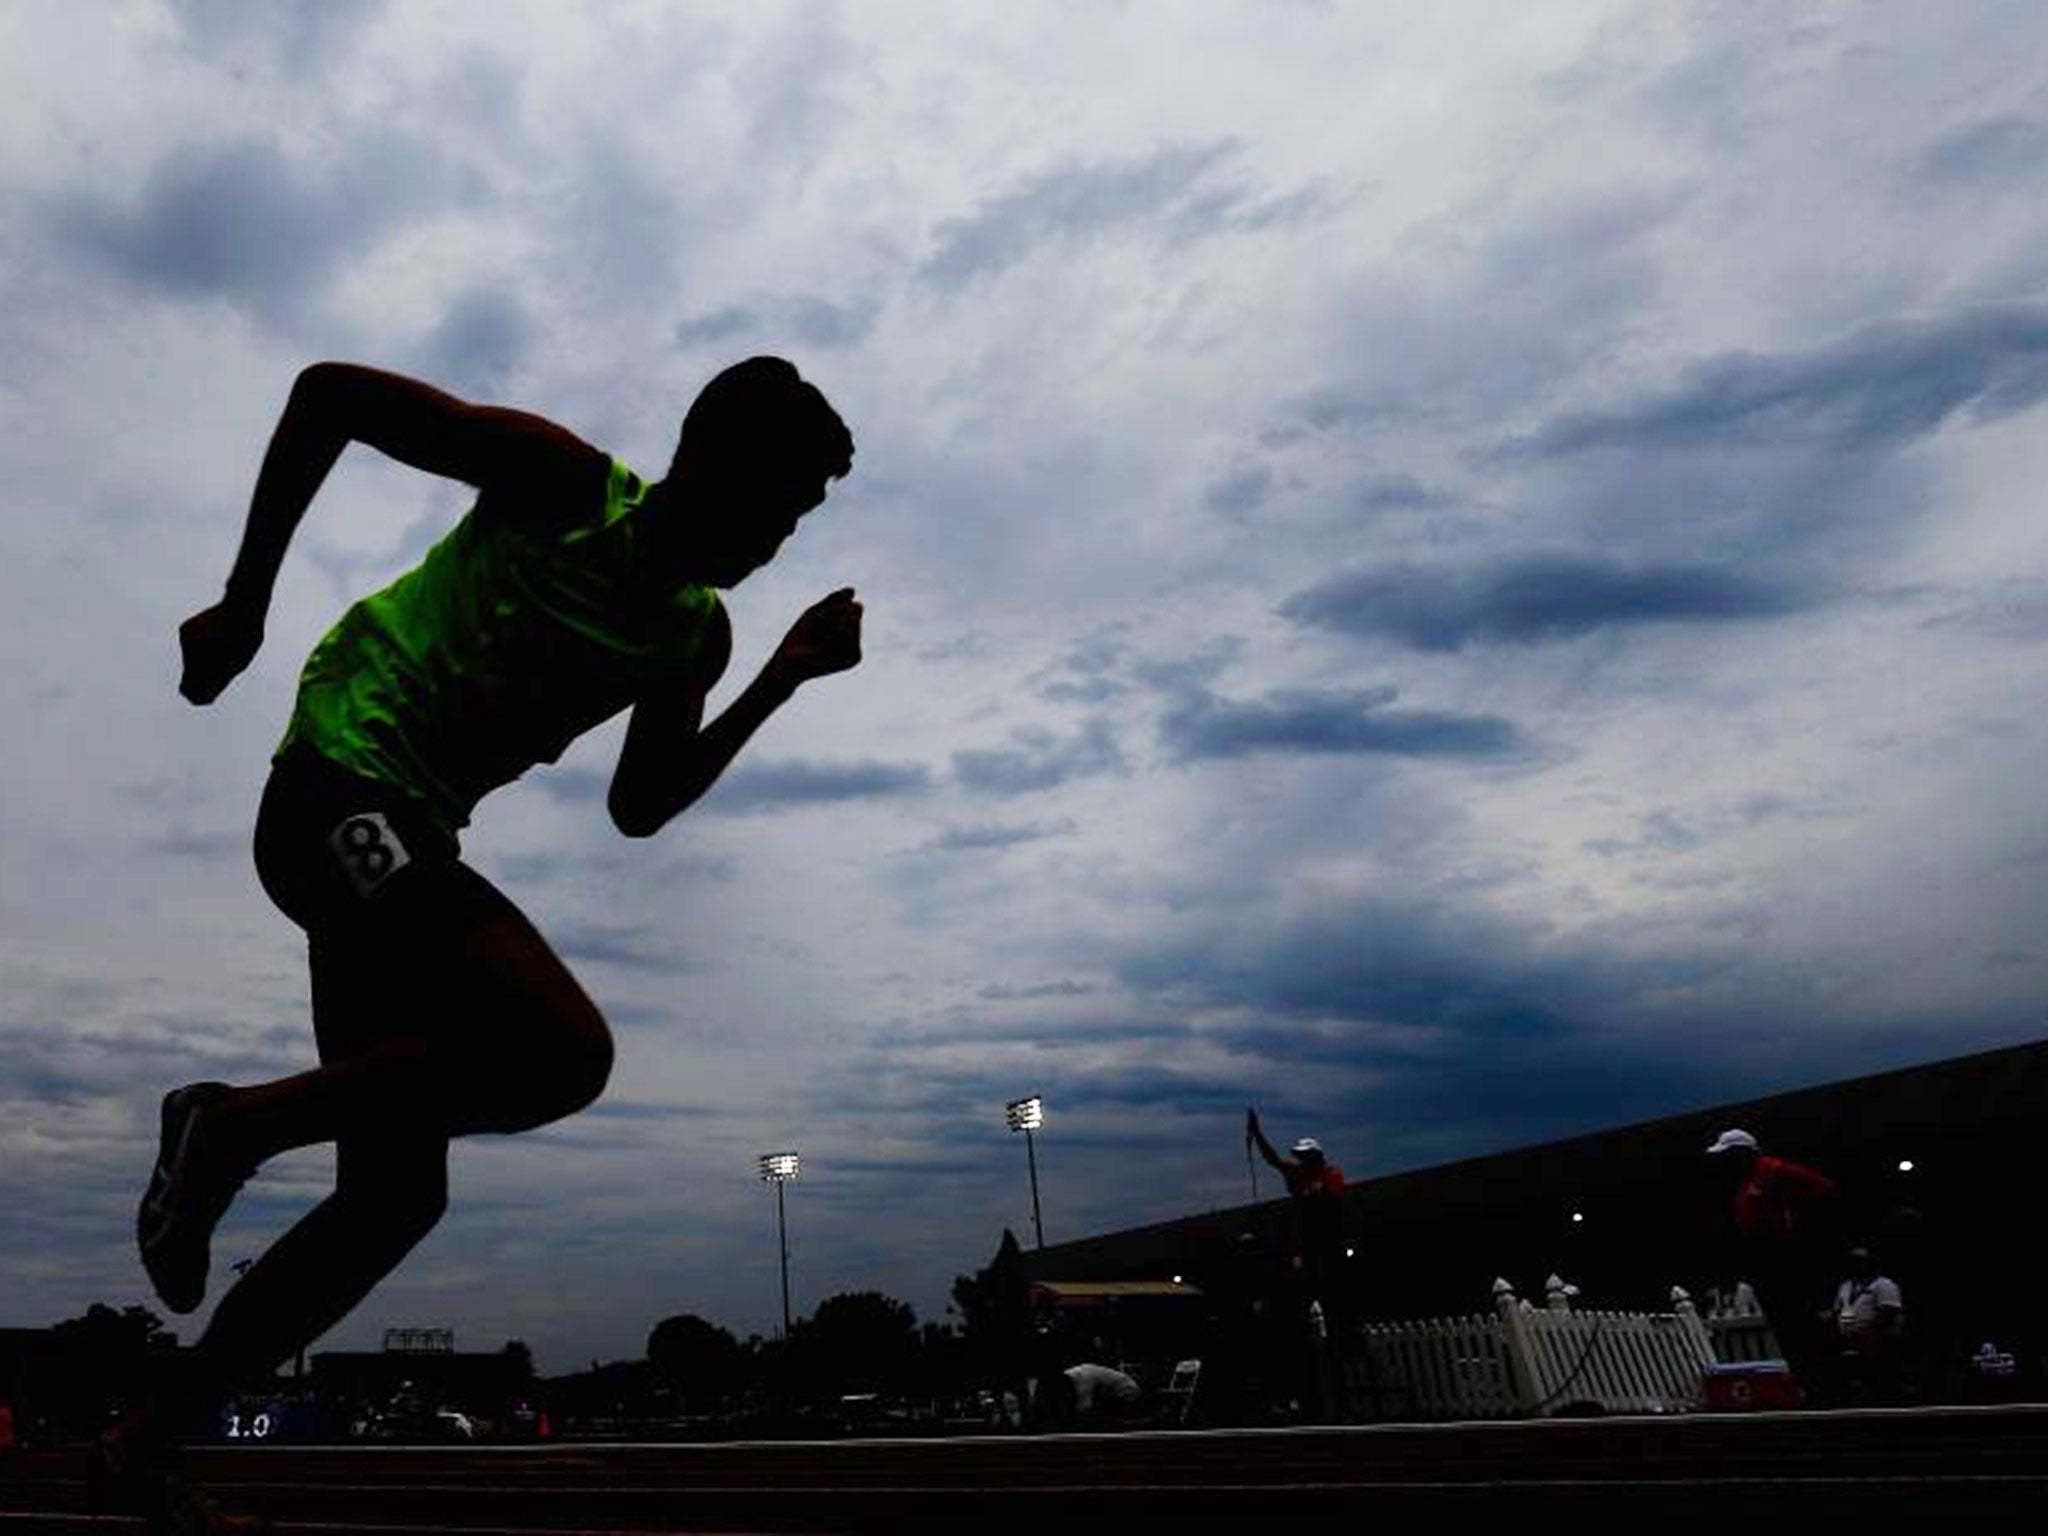 An athlete competes in the 2015 US Outdoor Track and Field Championships at Hayward Field, Eugene, Oregon. The city is struggling to find funds to host the 2021 World Championships